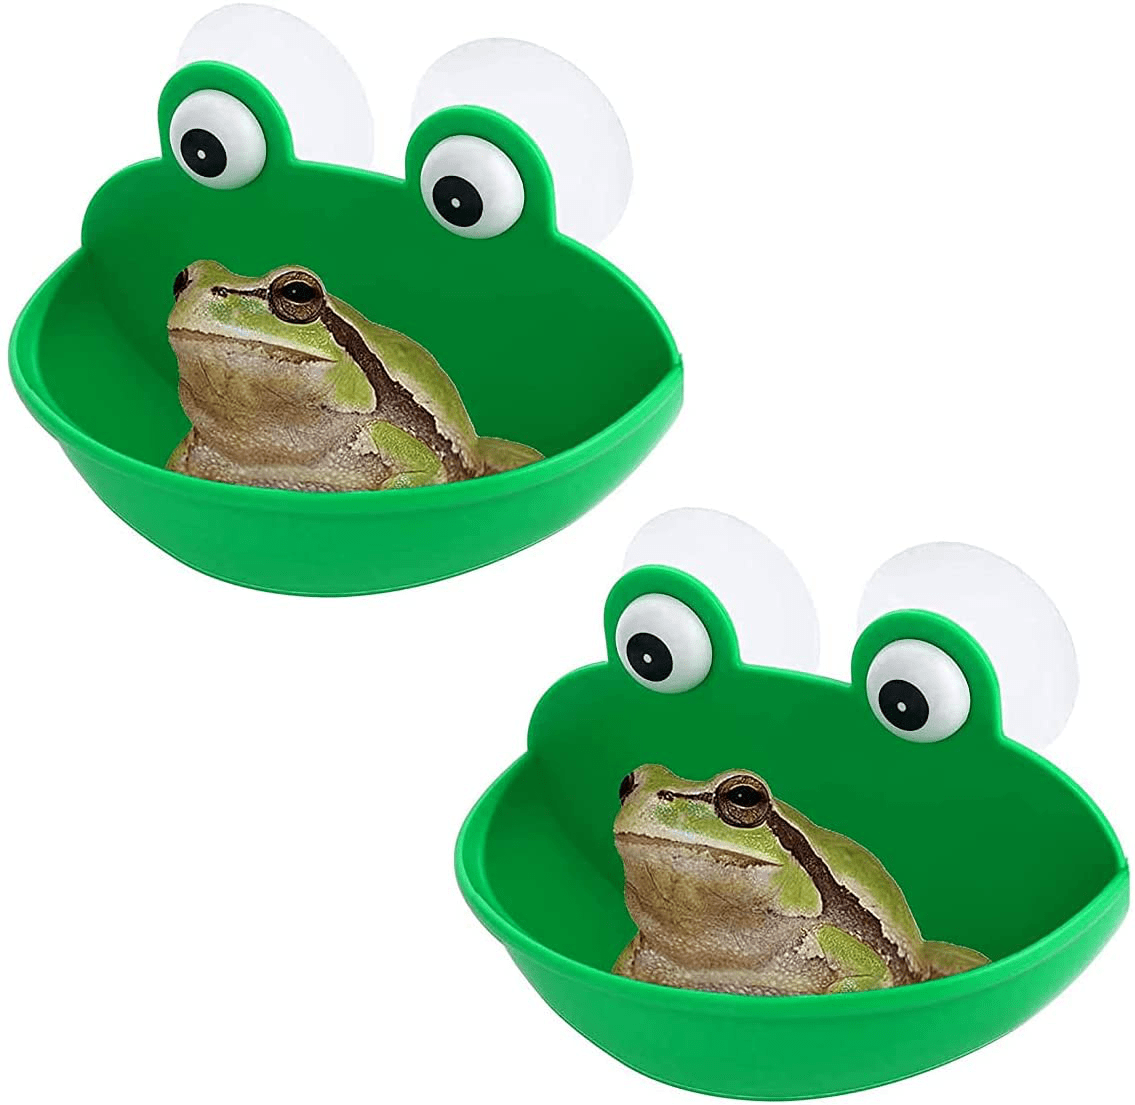 2 Pieces Frog Habitat with Dual Suction Cups Cute Fish Tank for Amphibian Aquatic Toad Frog Tadpole Tree Frog Small Aquatic Animals